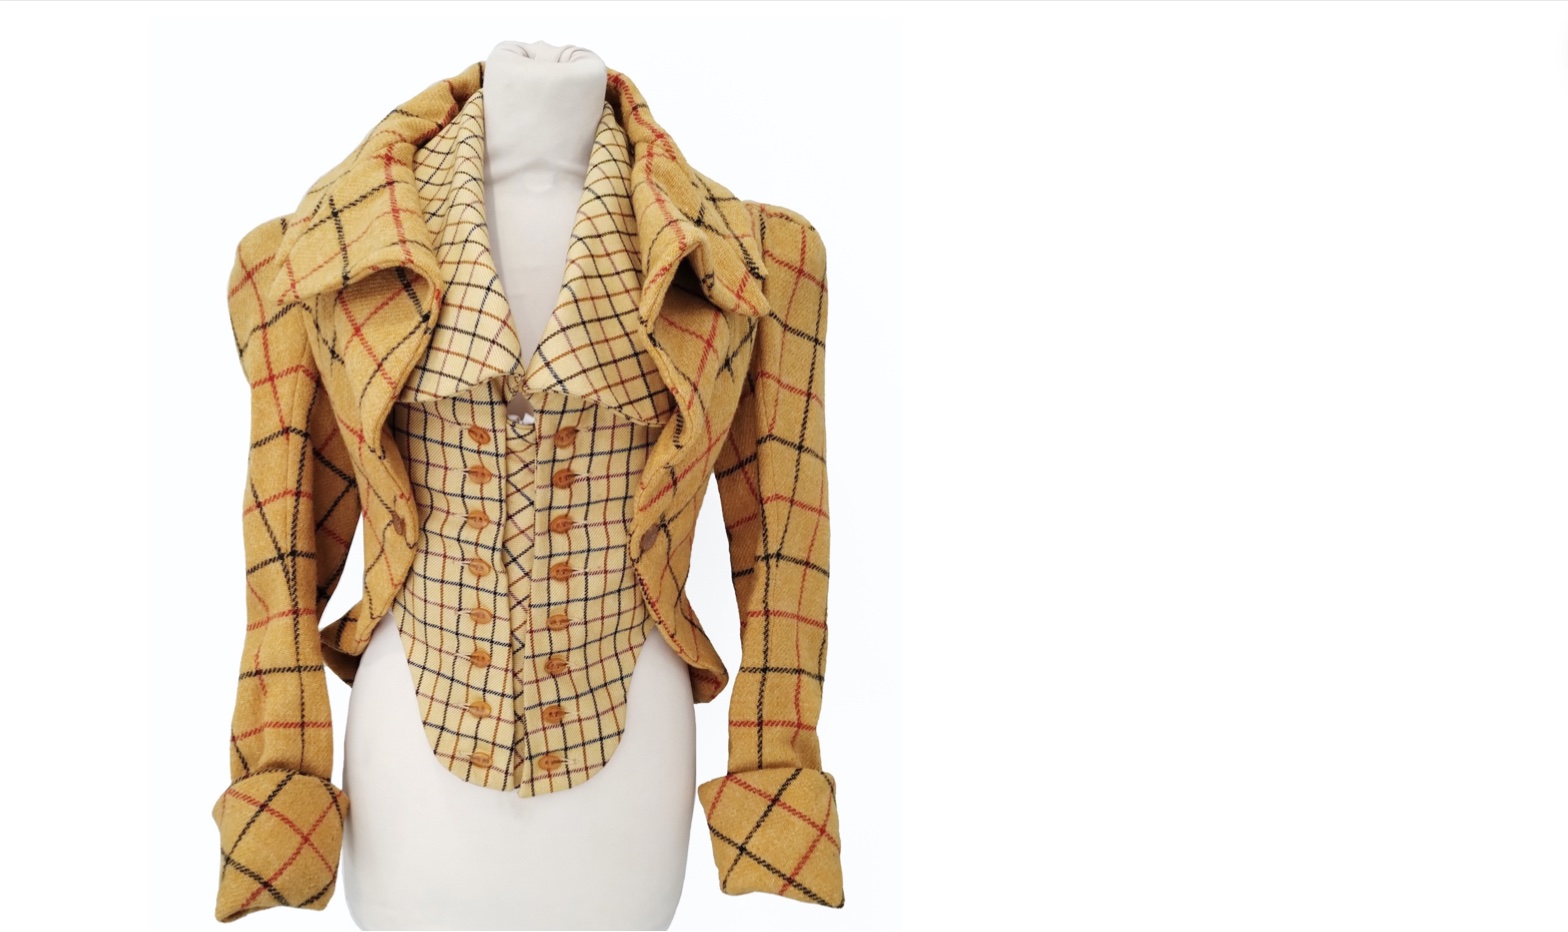 Vivienne Westwood costume collecting to sell - Antique Collecting